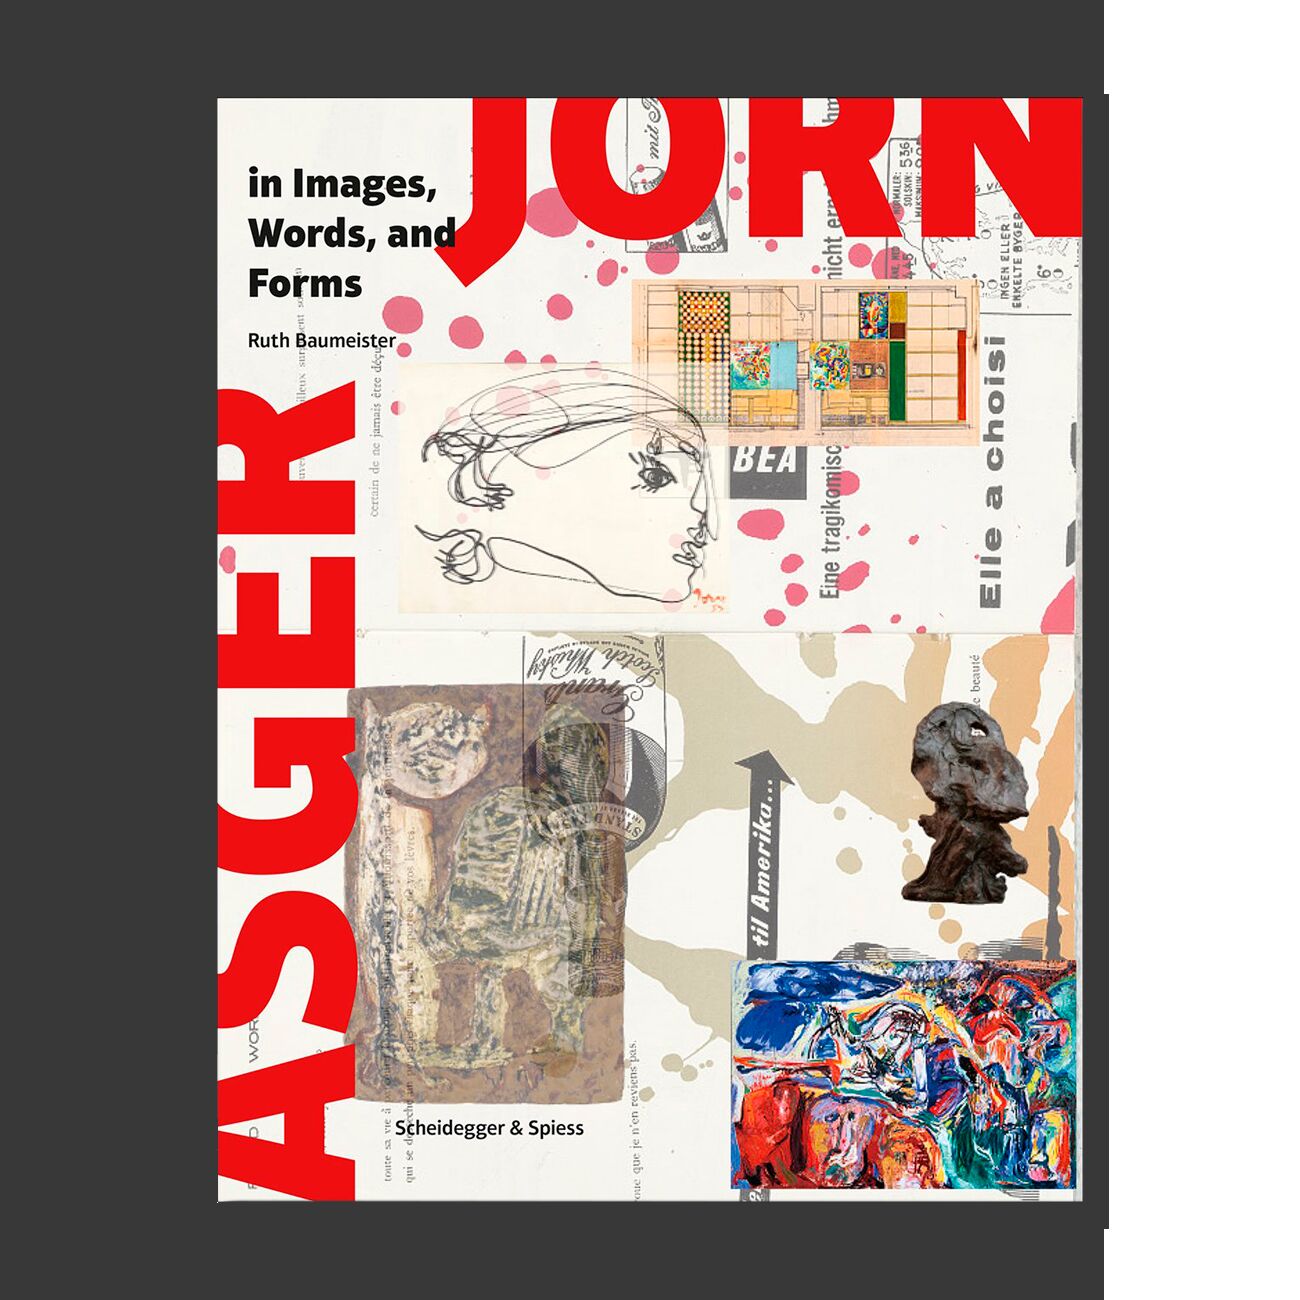 Asger Jorn in Images, Words and Forms